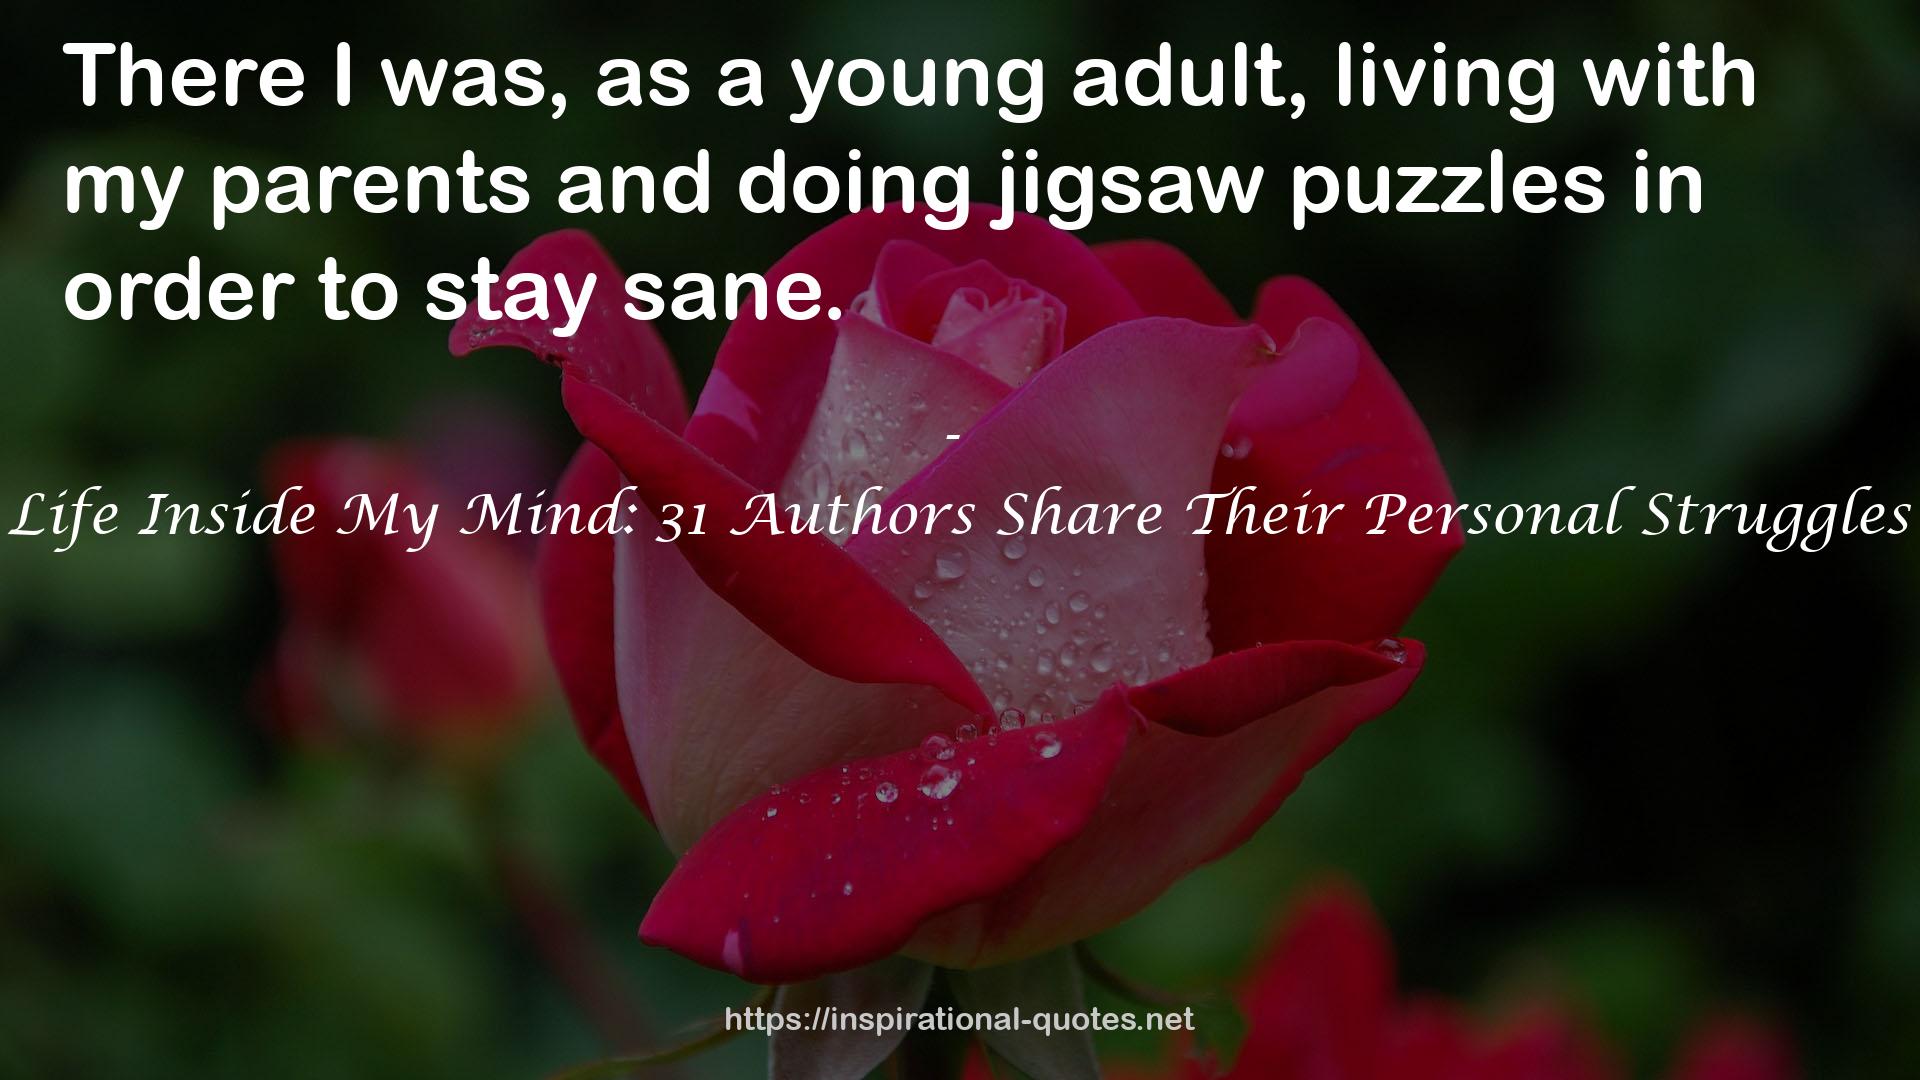 Life Inside My Mind: 31 Authors Share Their Personal Struggles QUOTES